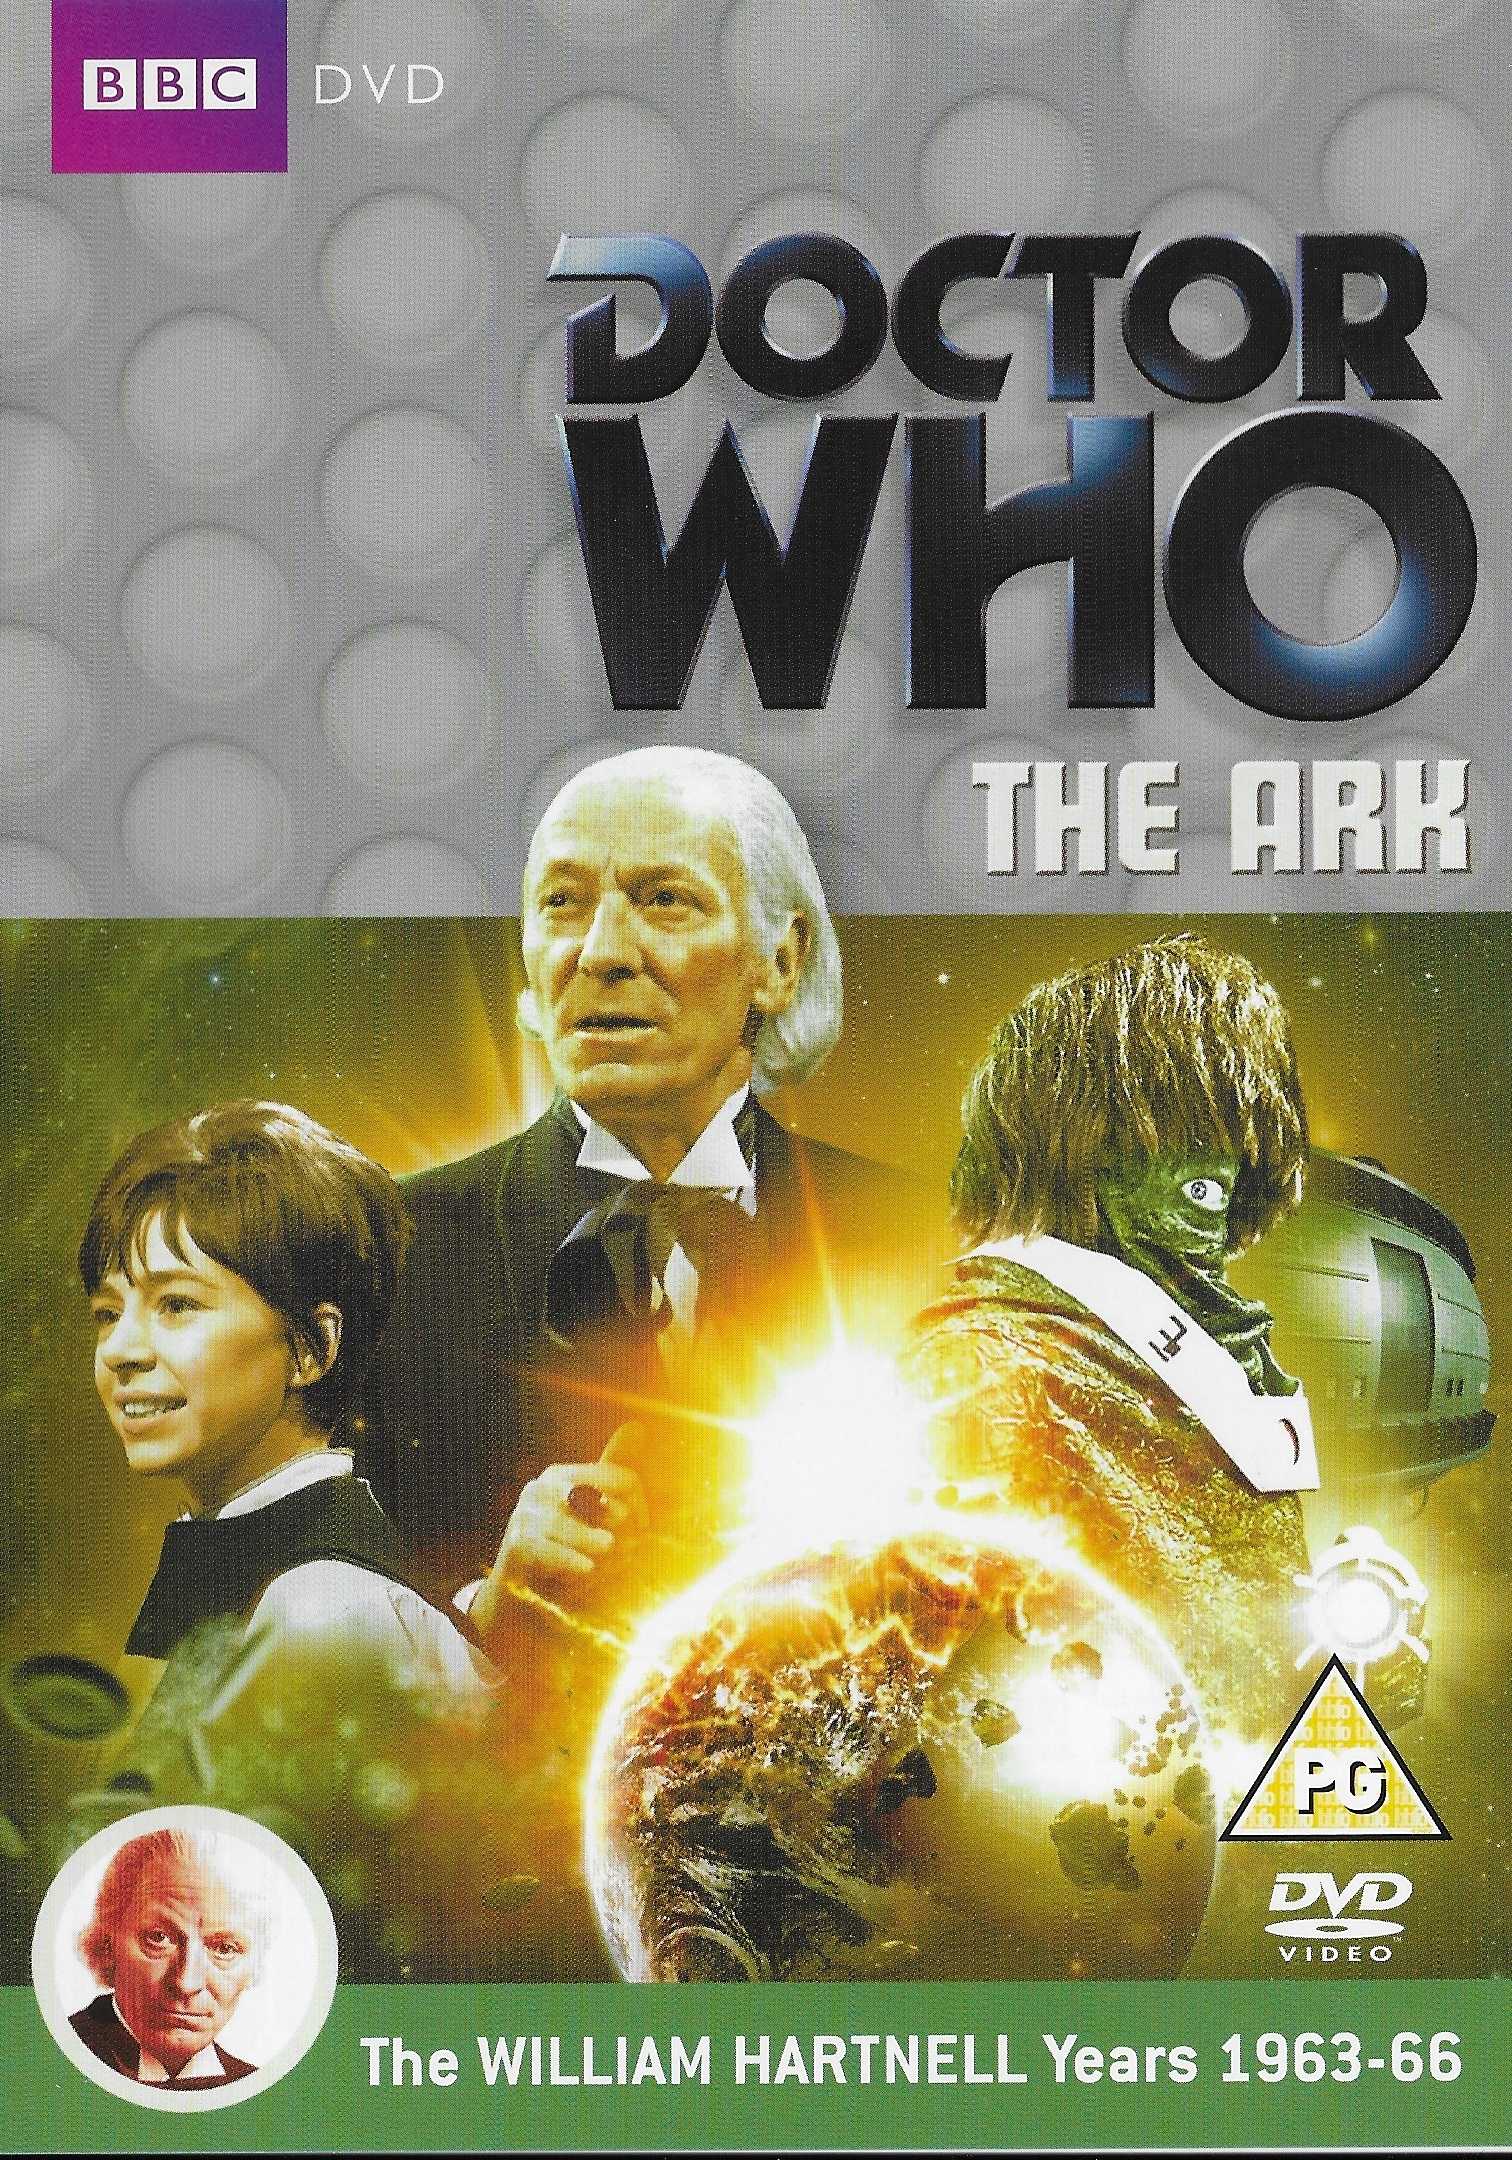 Picture of BBCDVD 2957 Doctor Who - The ark by artist Paul Erickson / Lesley Scott from the BBC records and Tapes library